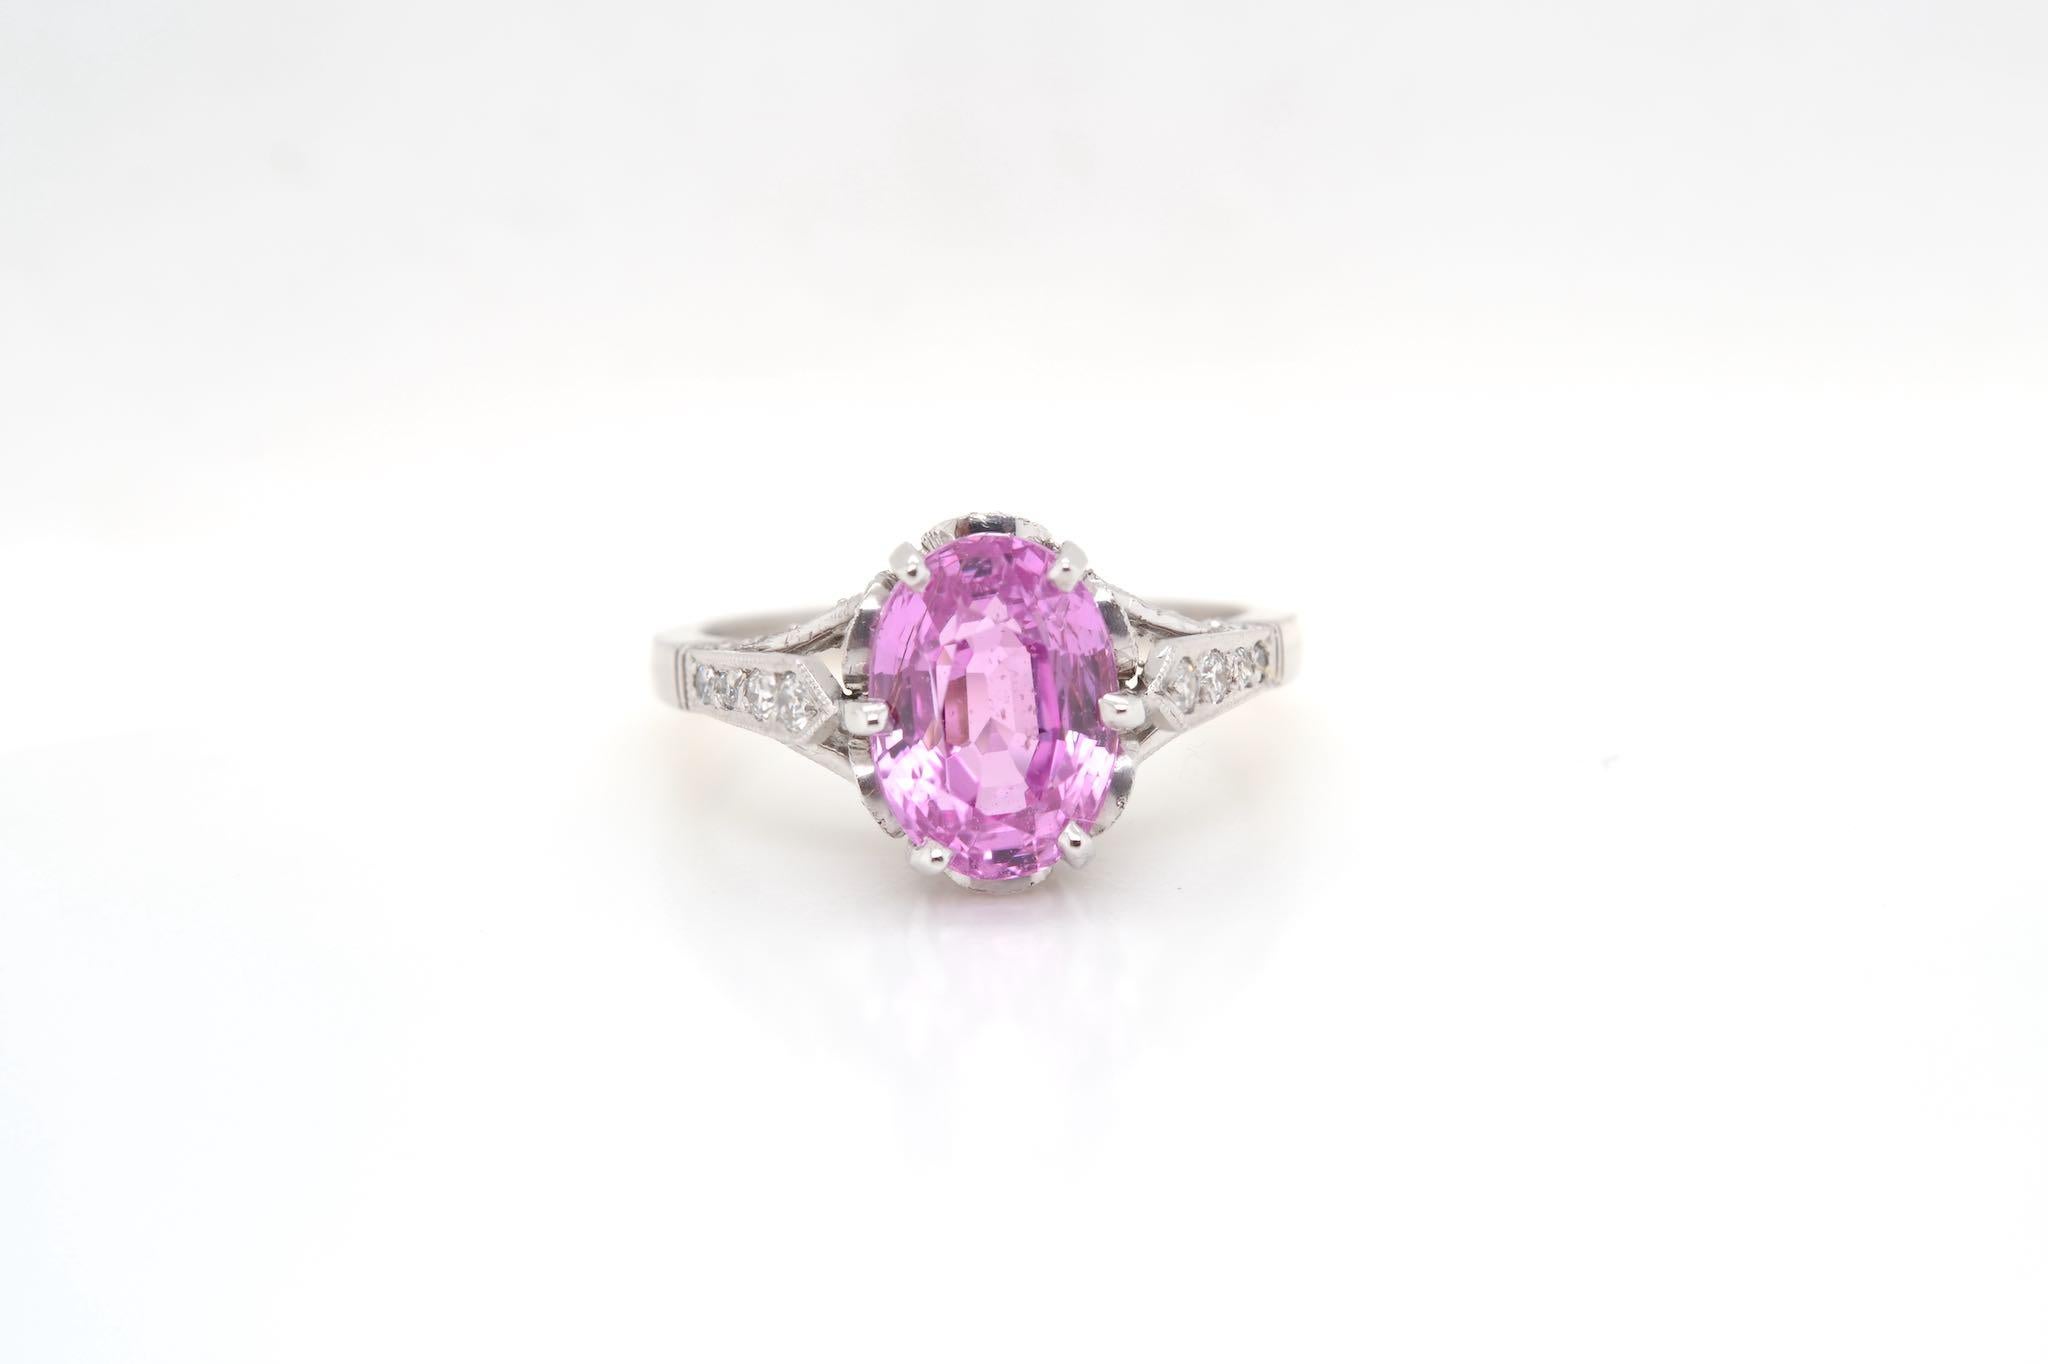 Stones: 3.73 carats pink sapphire
and diamonds for a total weight of 0.30 carat.
Material: Platinum
Dimensions: 1 cm length on finger
Weight: 5.9g
Size: 52 (free sizing)
Certificate
Ref. : 24219 / 24368